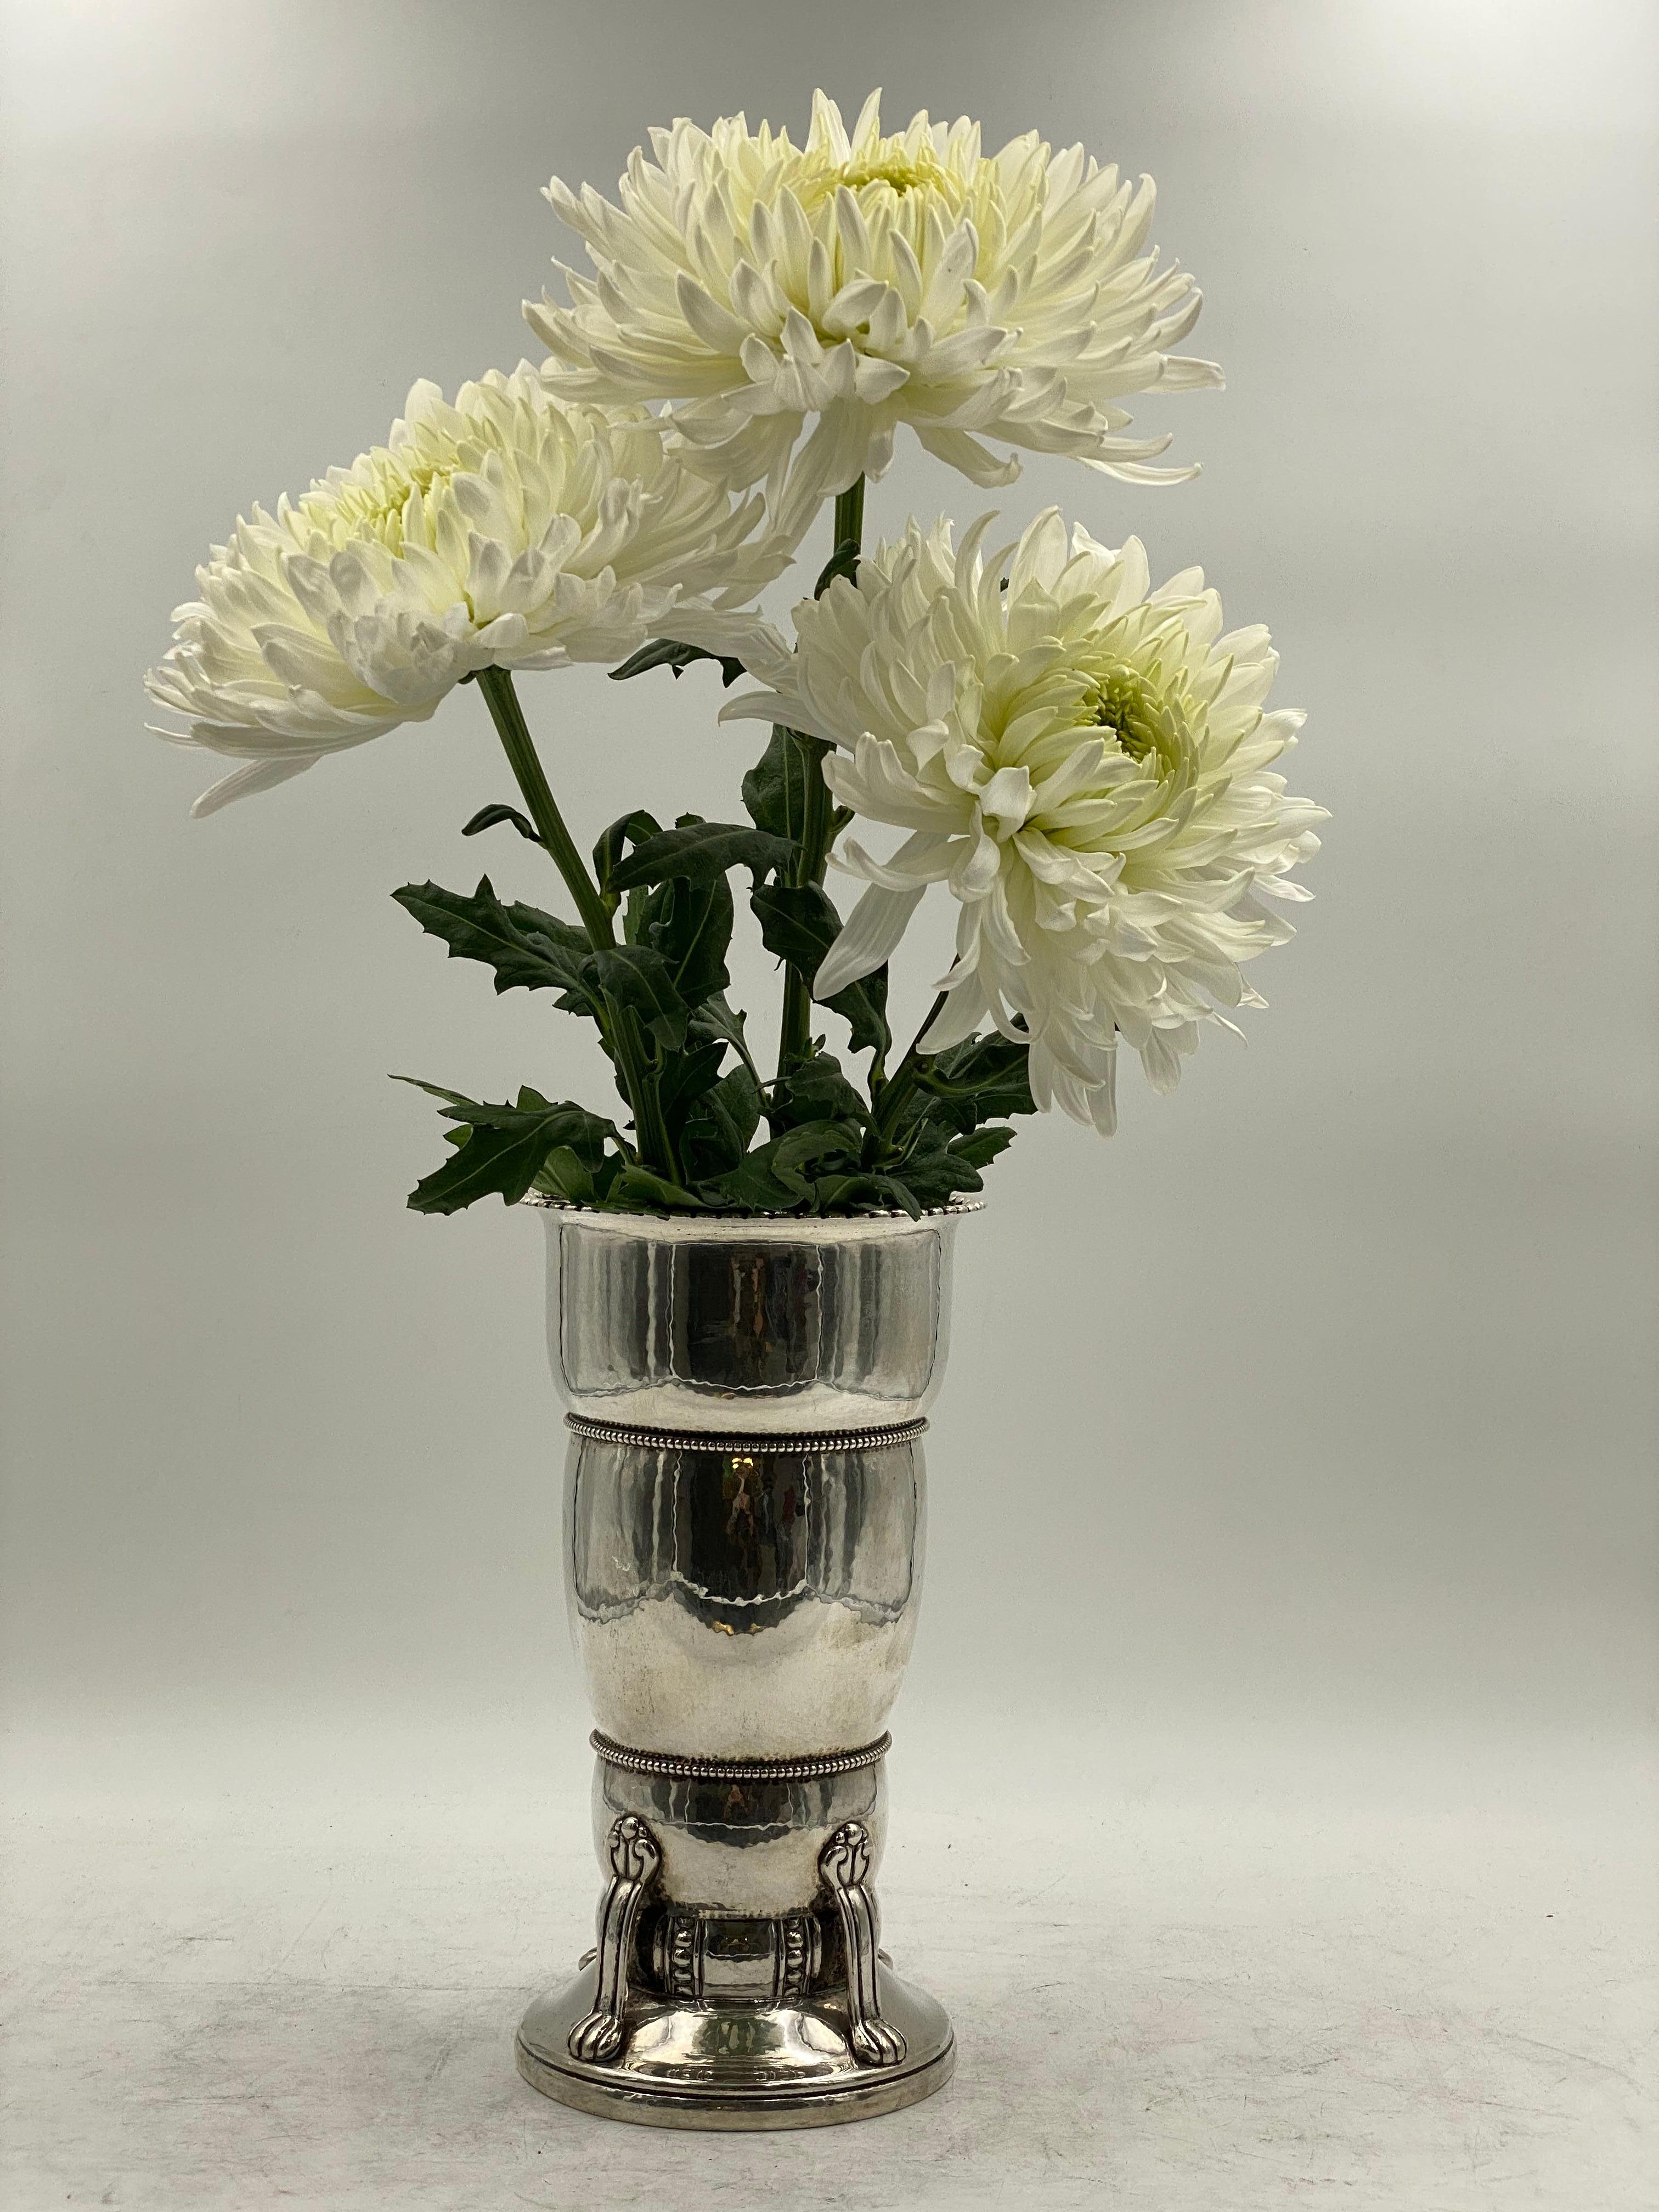 Early 20th century continental 0.826 Danish silver hand hammered vase with beaded rims, inscriptions, and applied decorations by Christian F. Heise. Measuring 10 1/8'' in height by 5 1/2'' in diameter at the top and weighing 23.1 ozt. Bearing